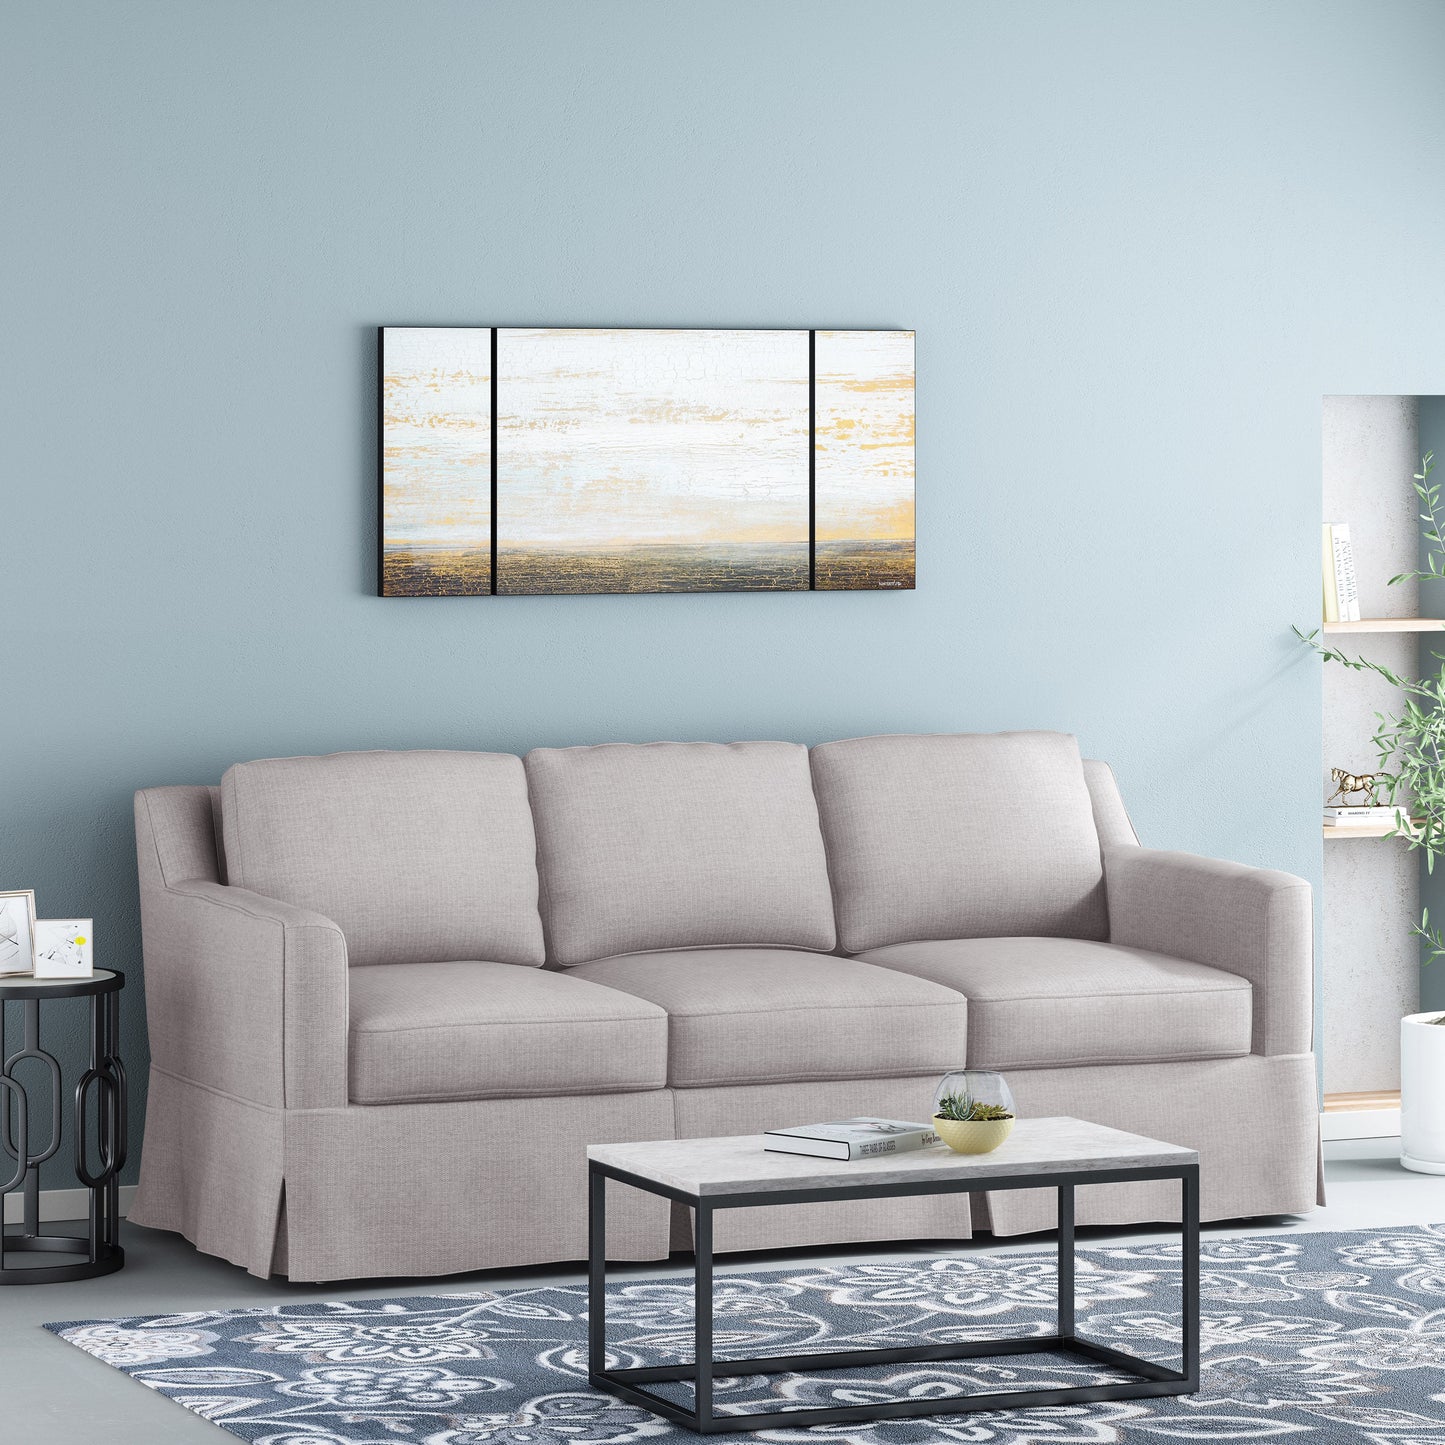 Bainville Contemporary Fabric 3 Seater Sofa with Skirt